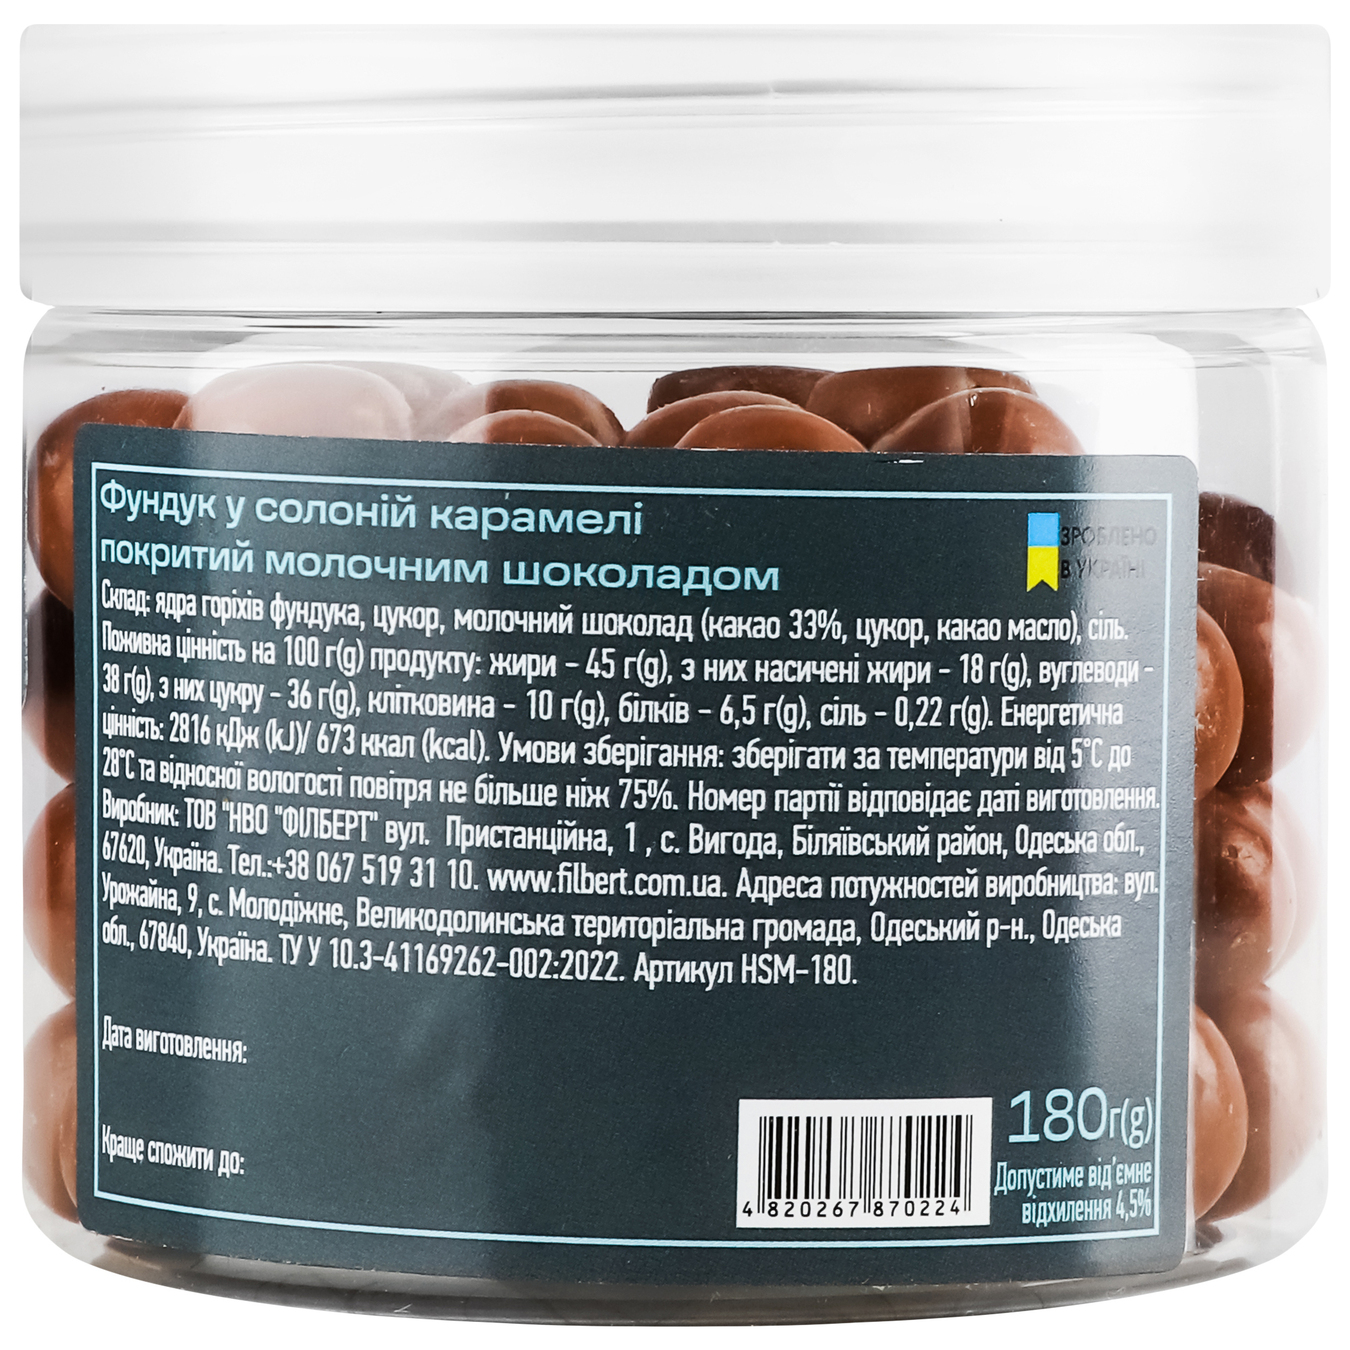 Flarino hazelnuts in salted caramel covered with milk chocolate 180g 4